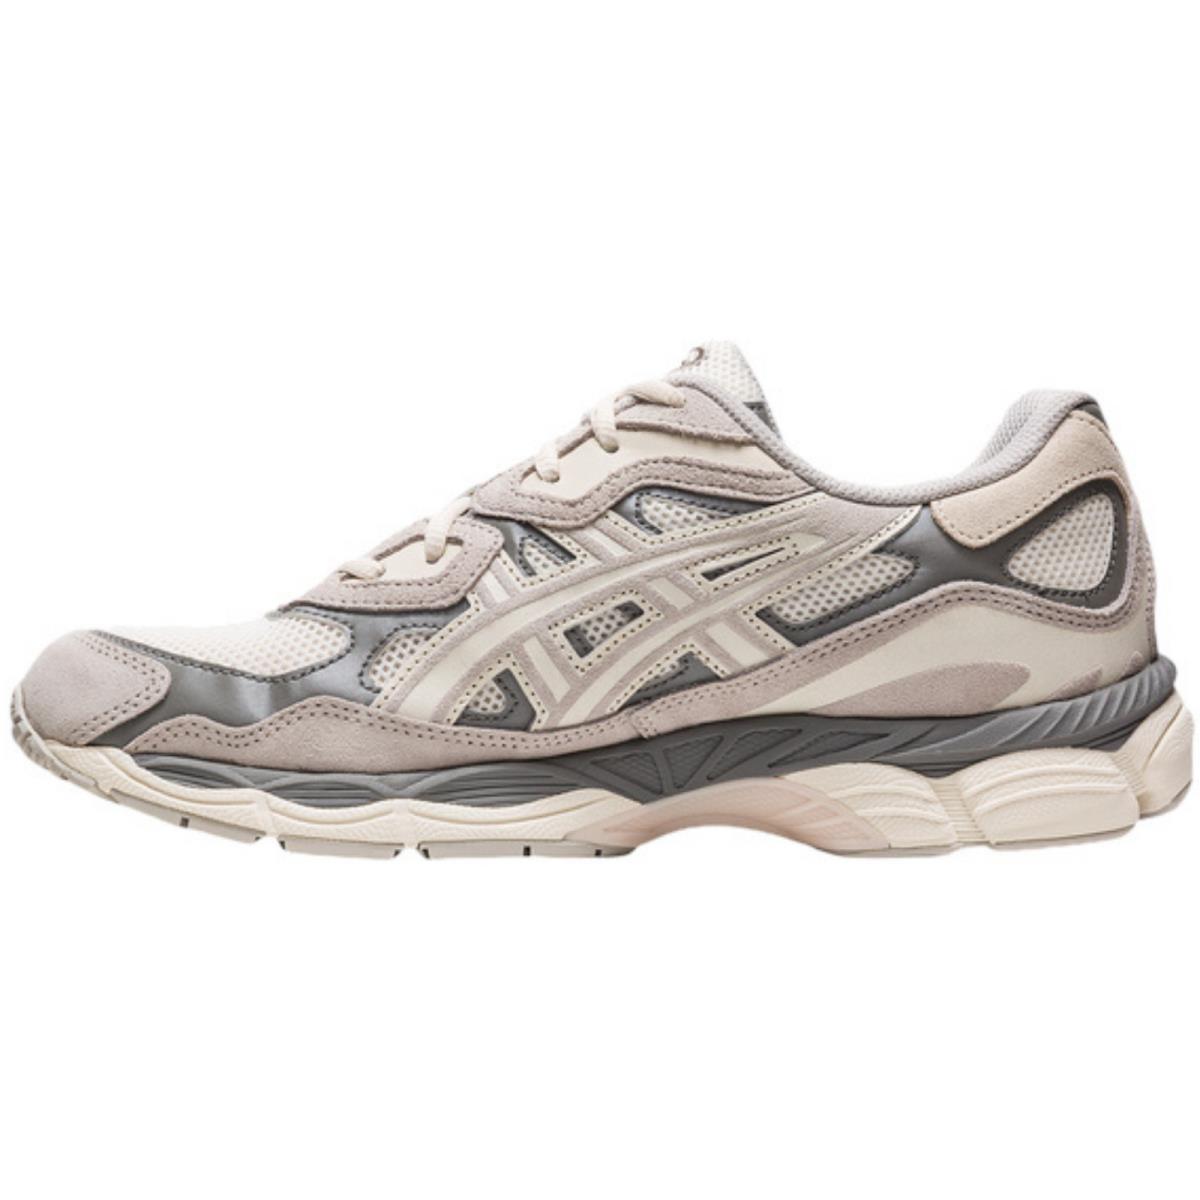 Men`s Asics Gel-nyc Casual Shoes All Colors US Sizes 7-14